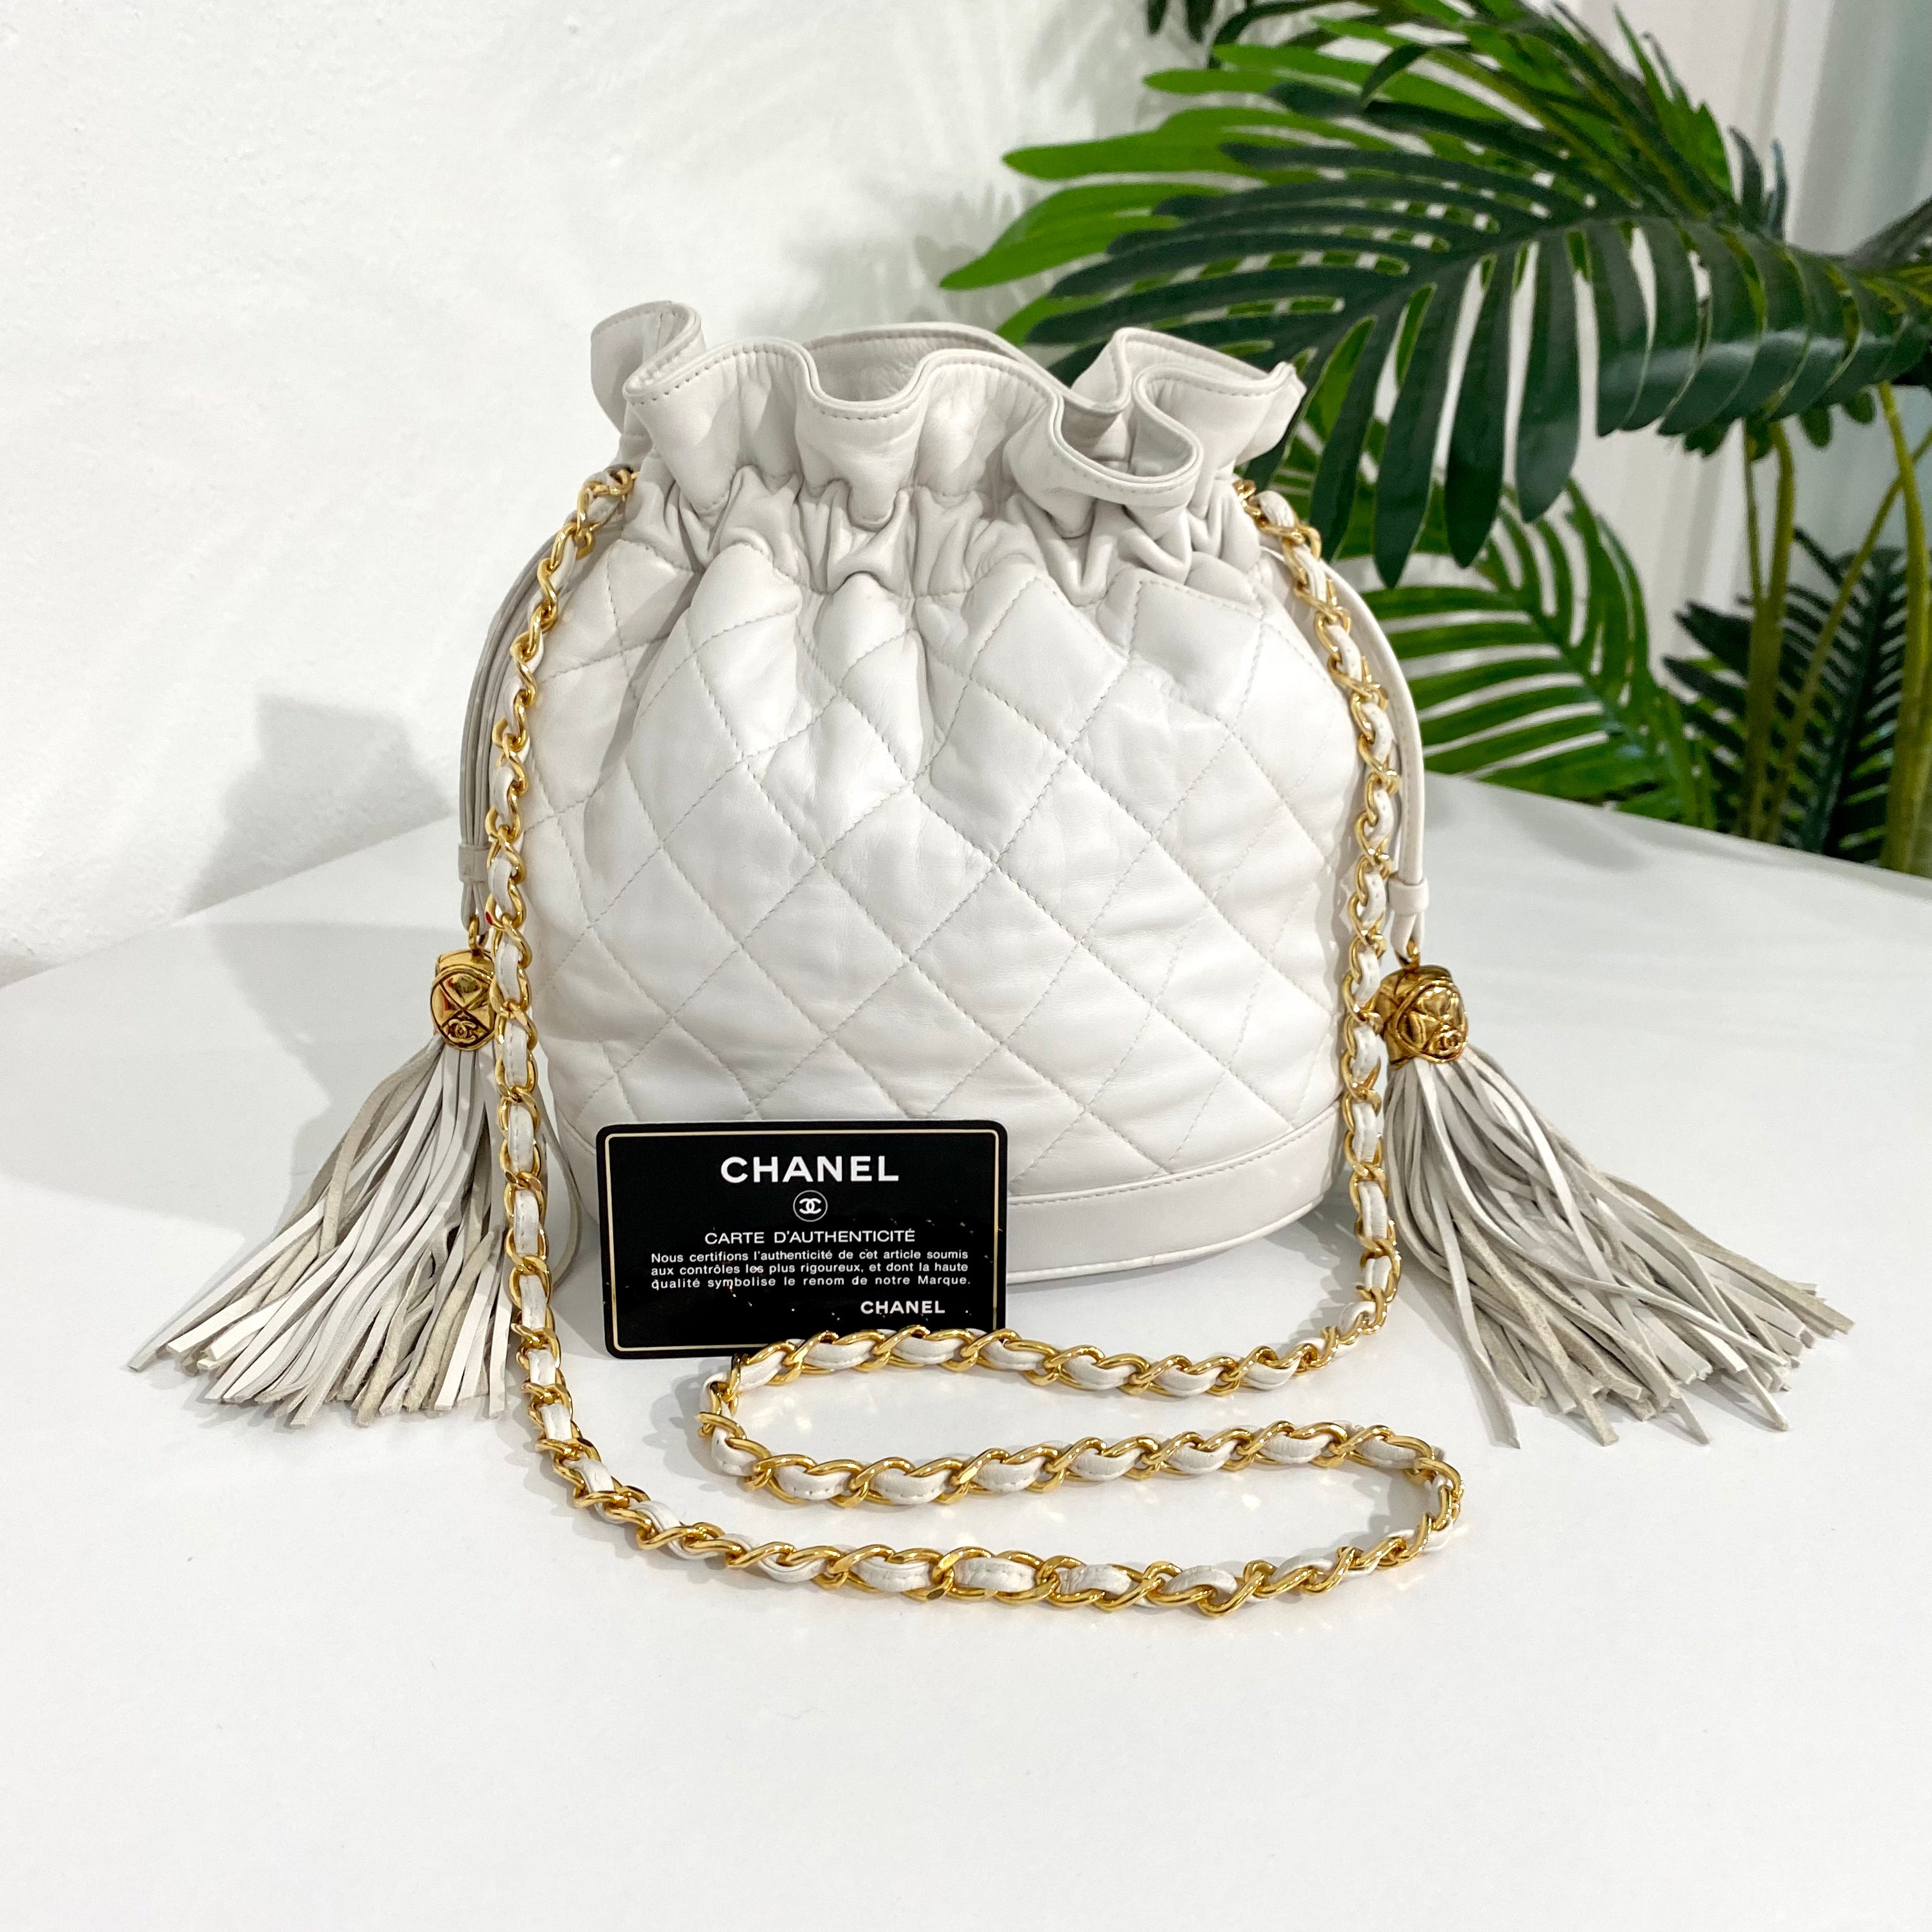 white and silver chanel bag vintage